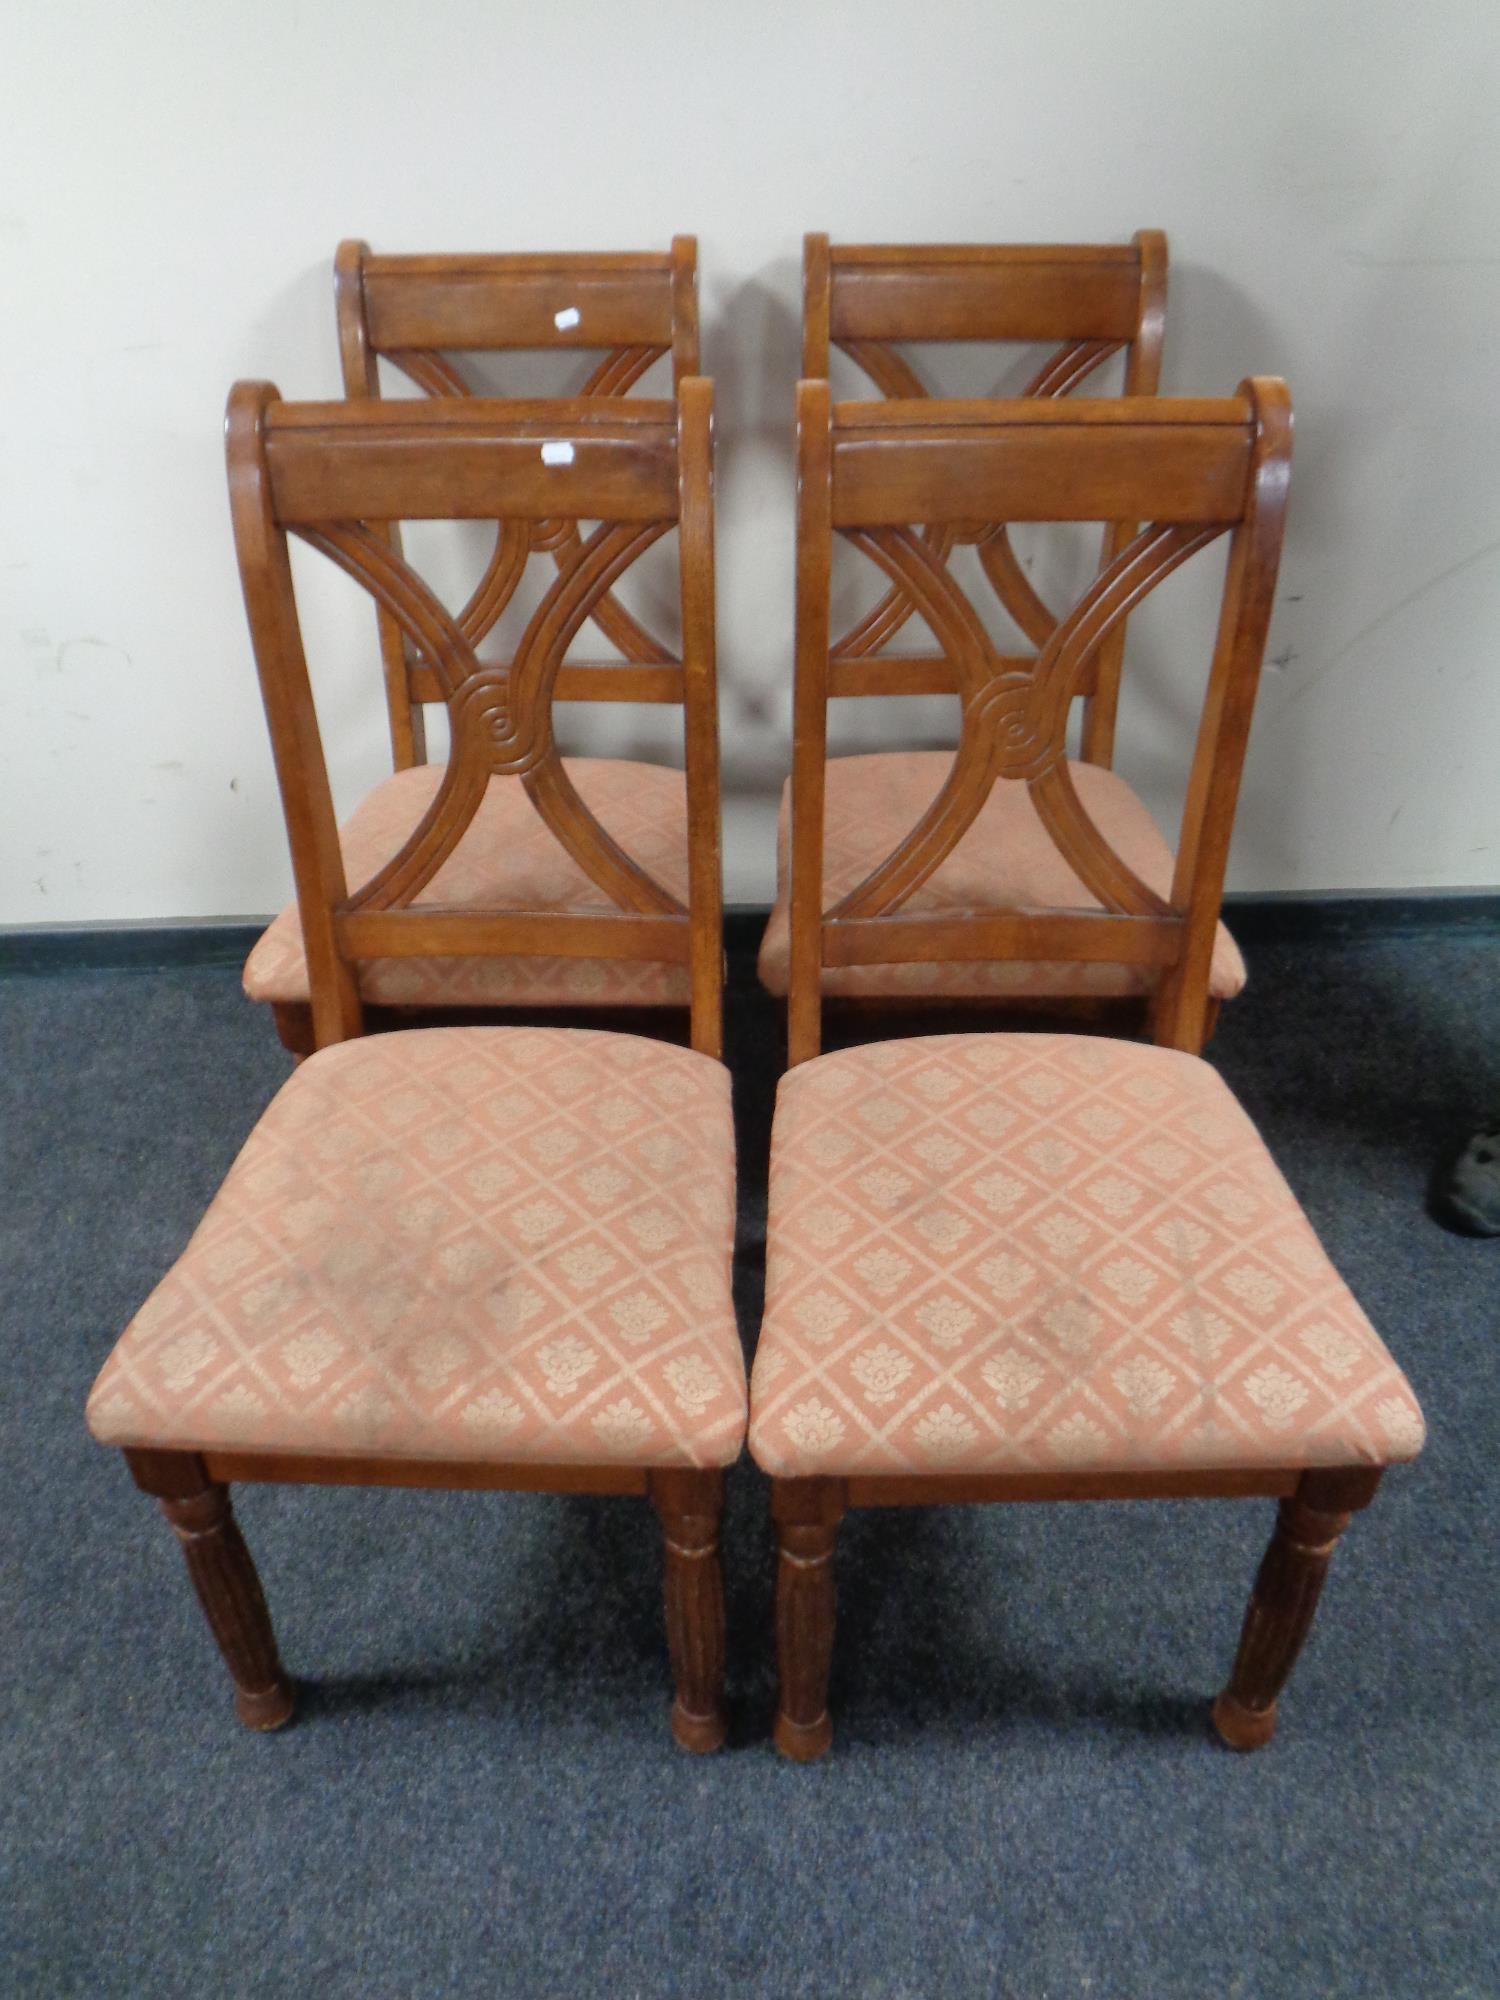 A set of four American style dining chairs